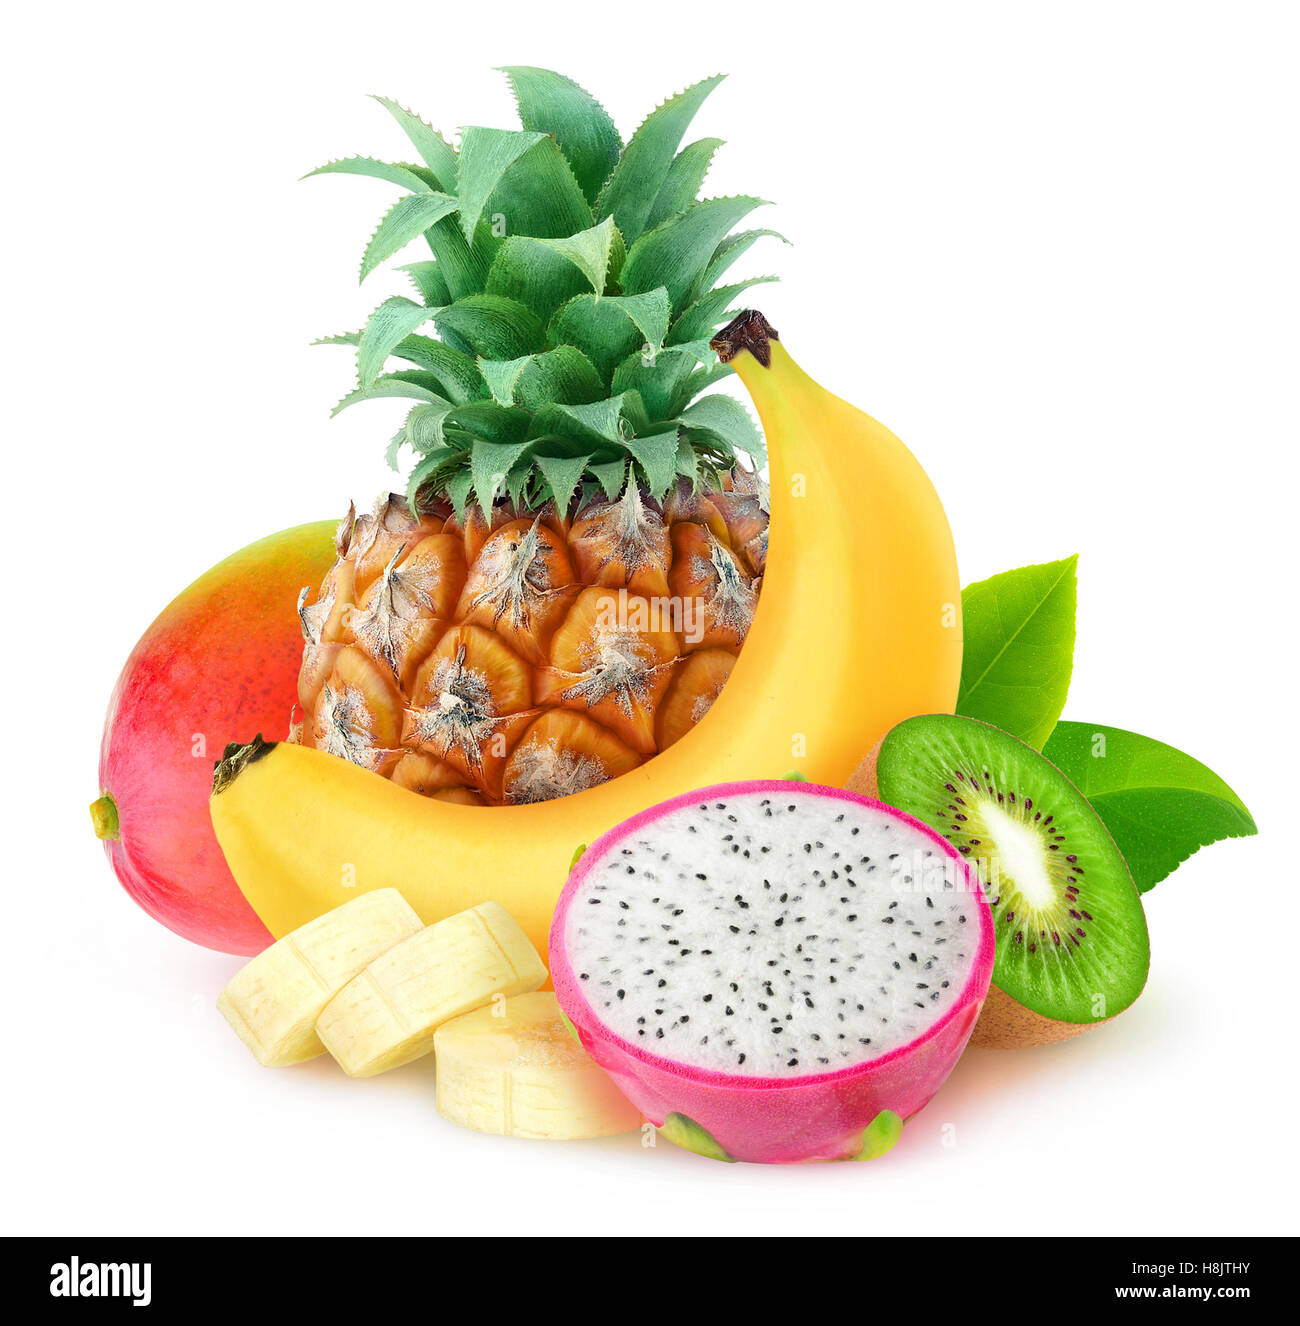 Isolated tropical fruits. Pineapple, banana, kiwi, dragon fruit and mango isolated on white background with clipping path Stock Photo